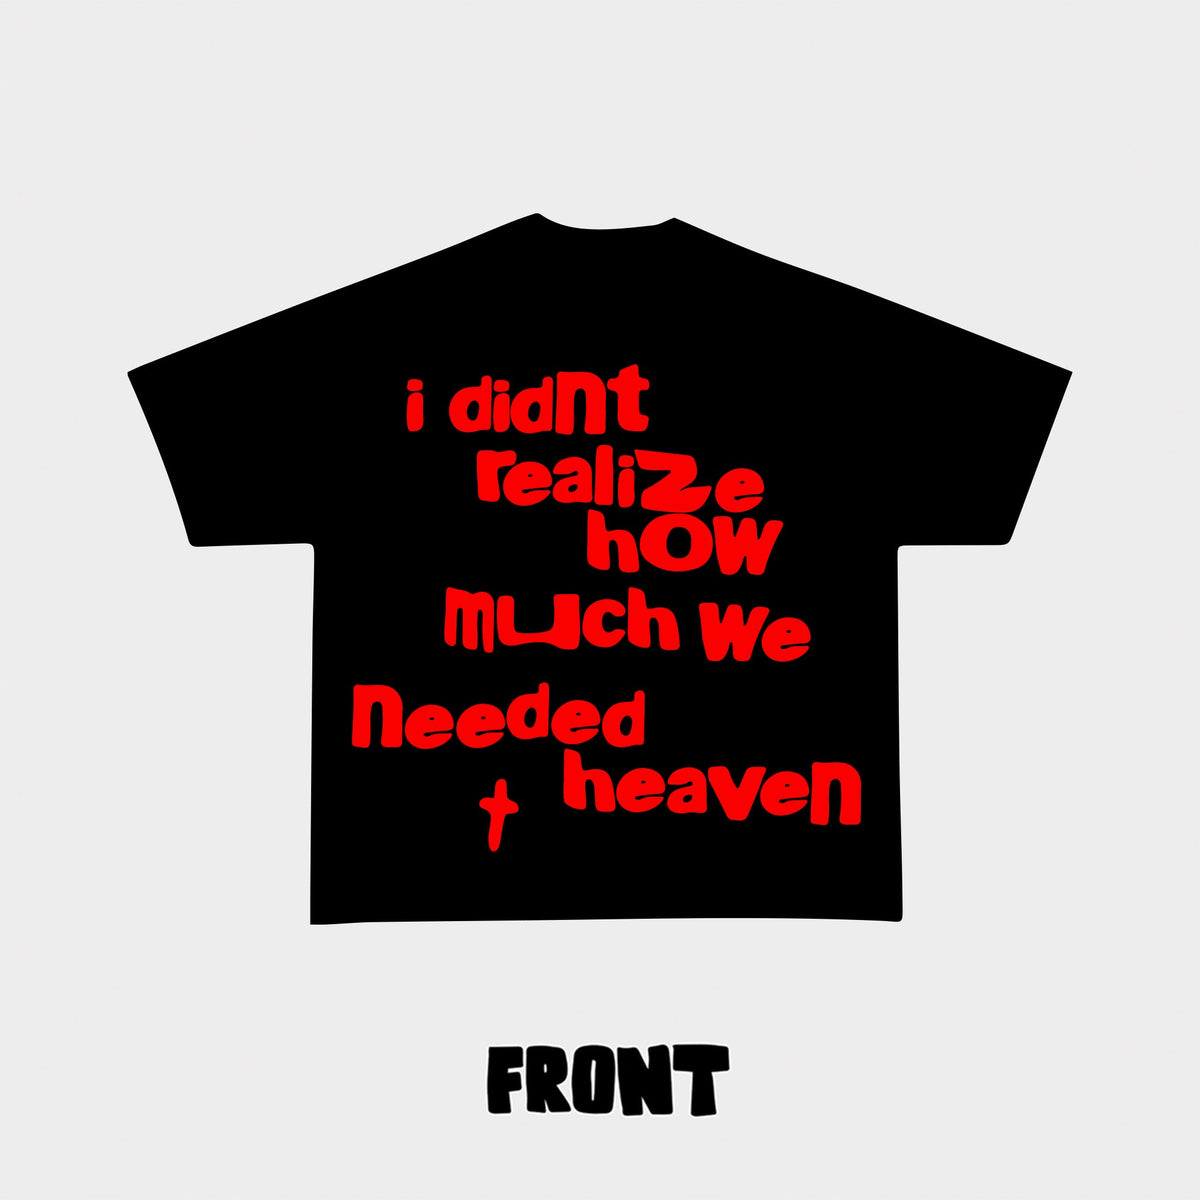 &quot;We Need Heaven&quot; Tee - RED LETTERS